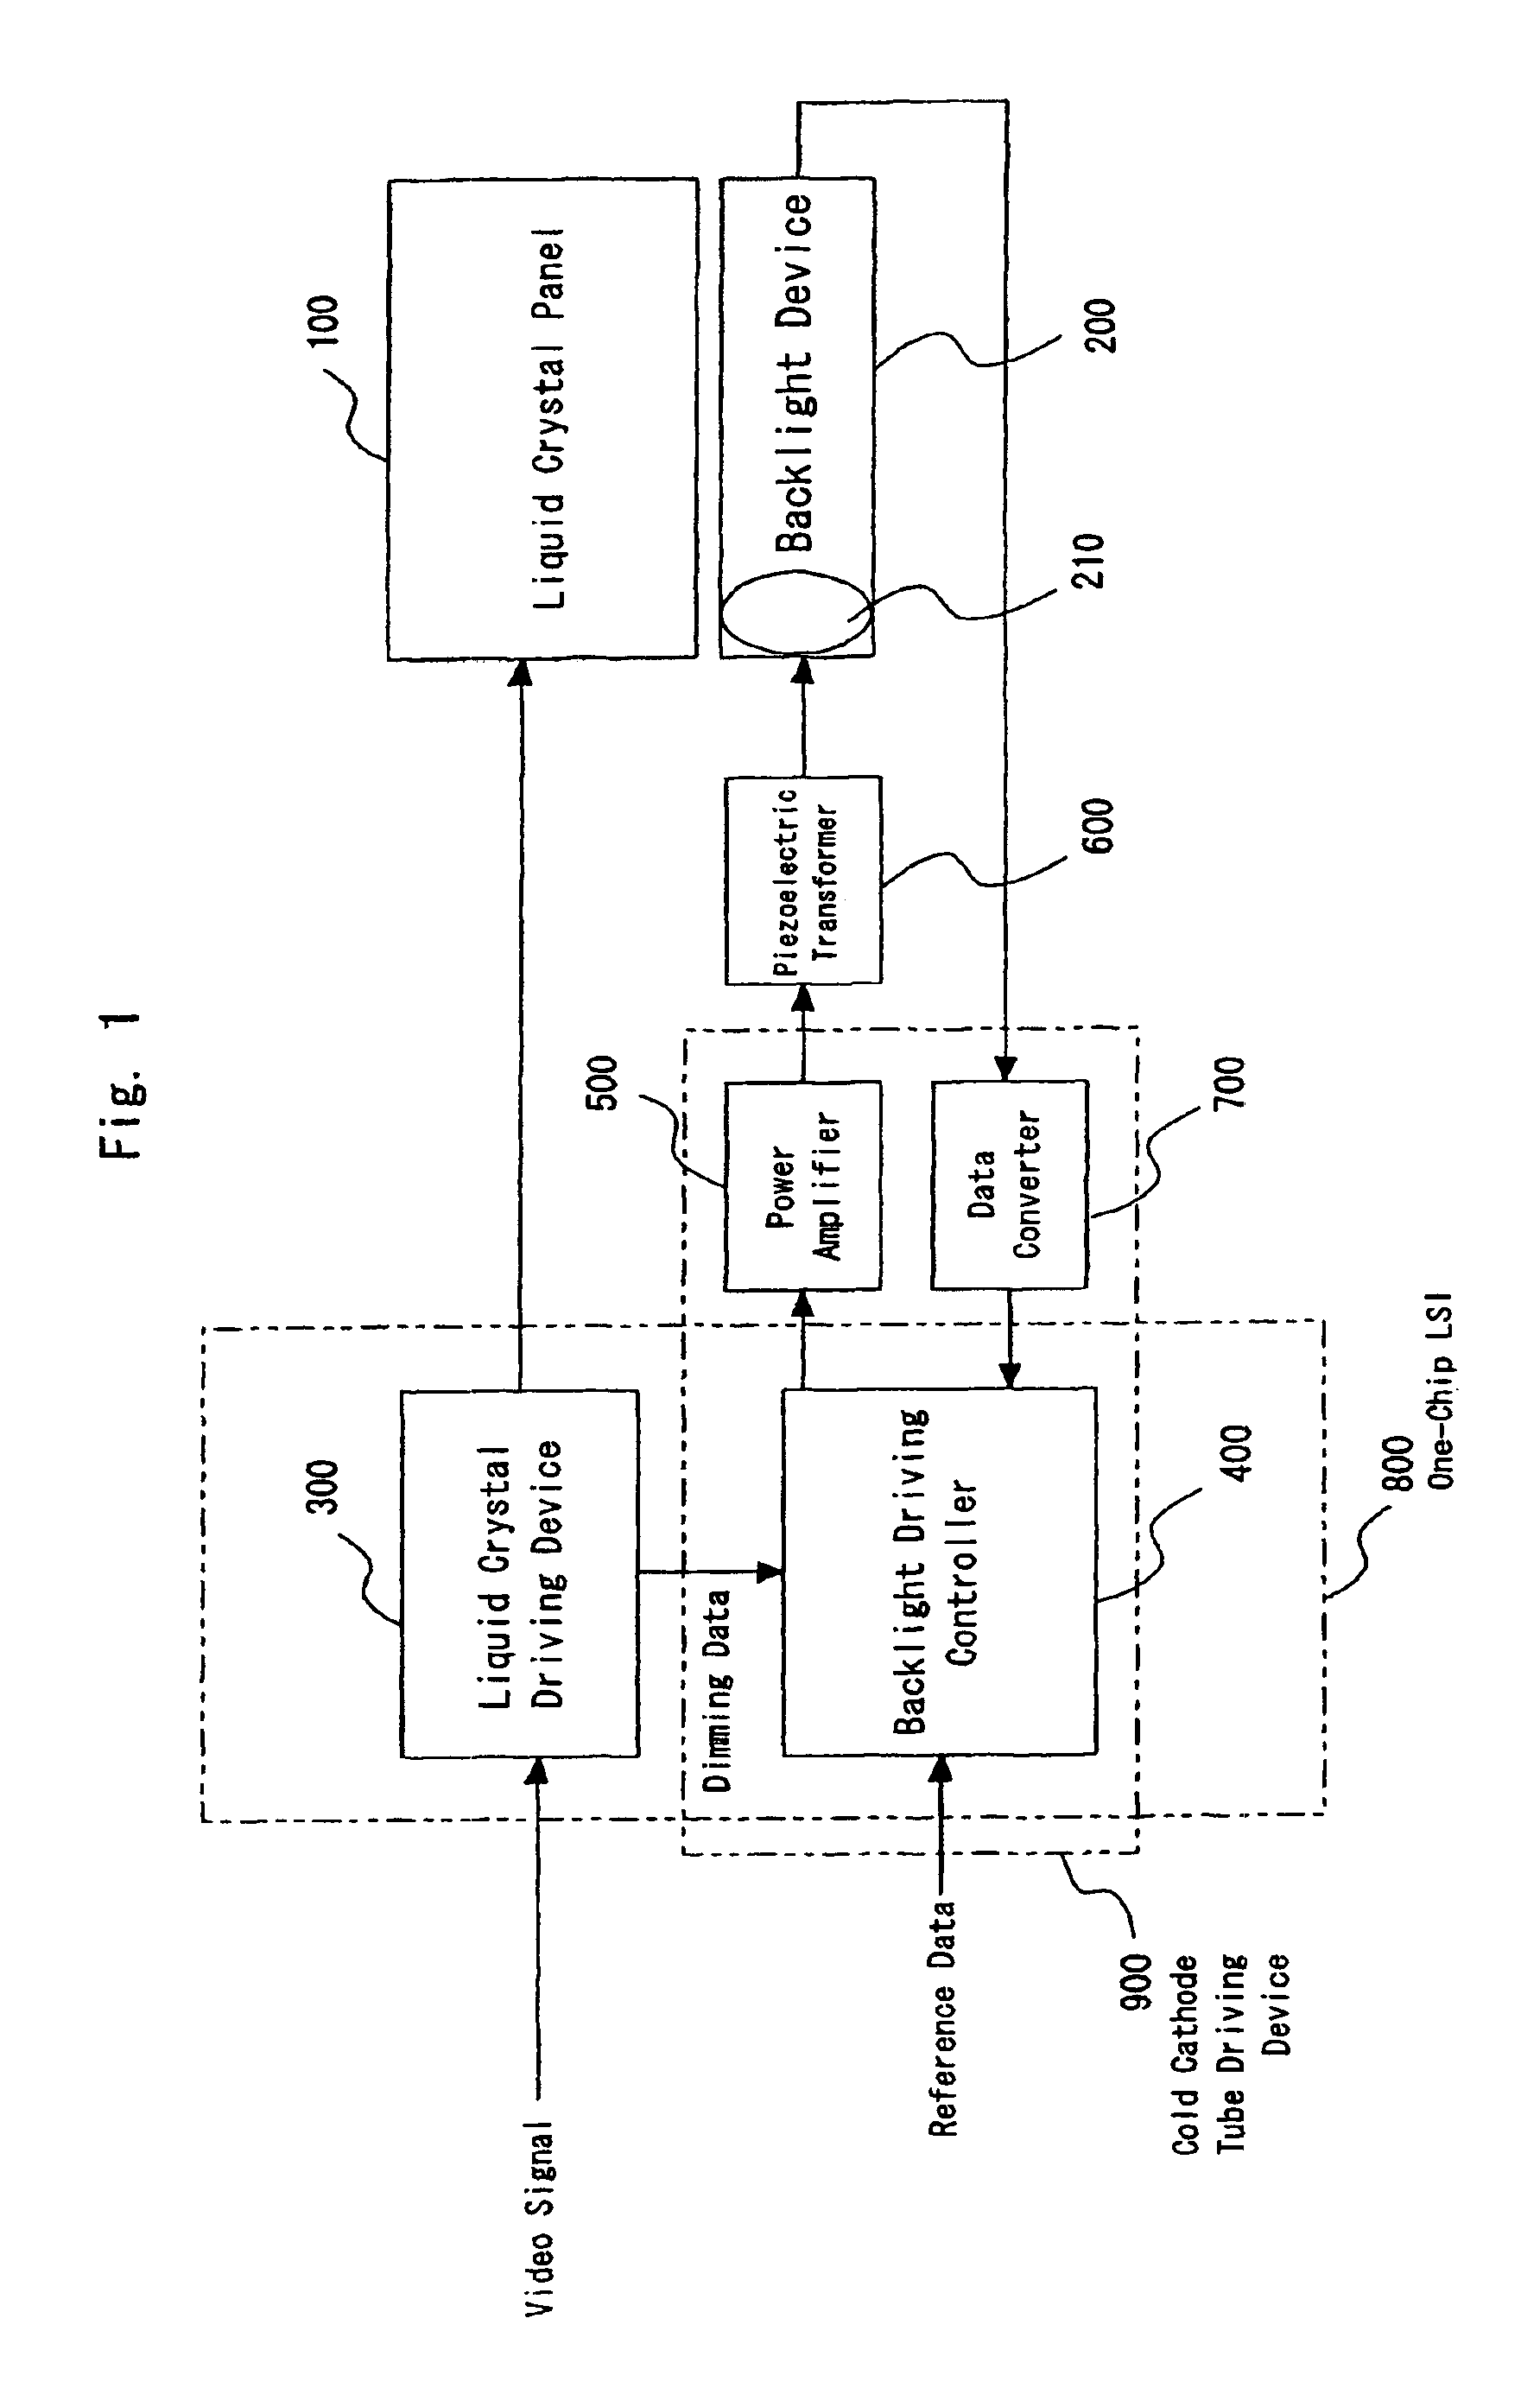 Cold-cathode driver and liquid crystal display